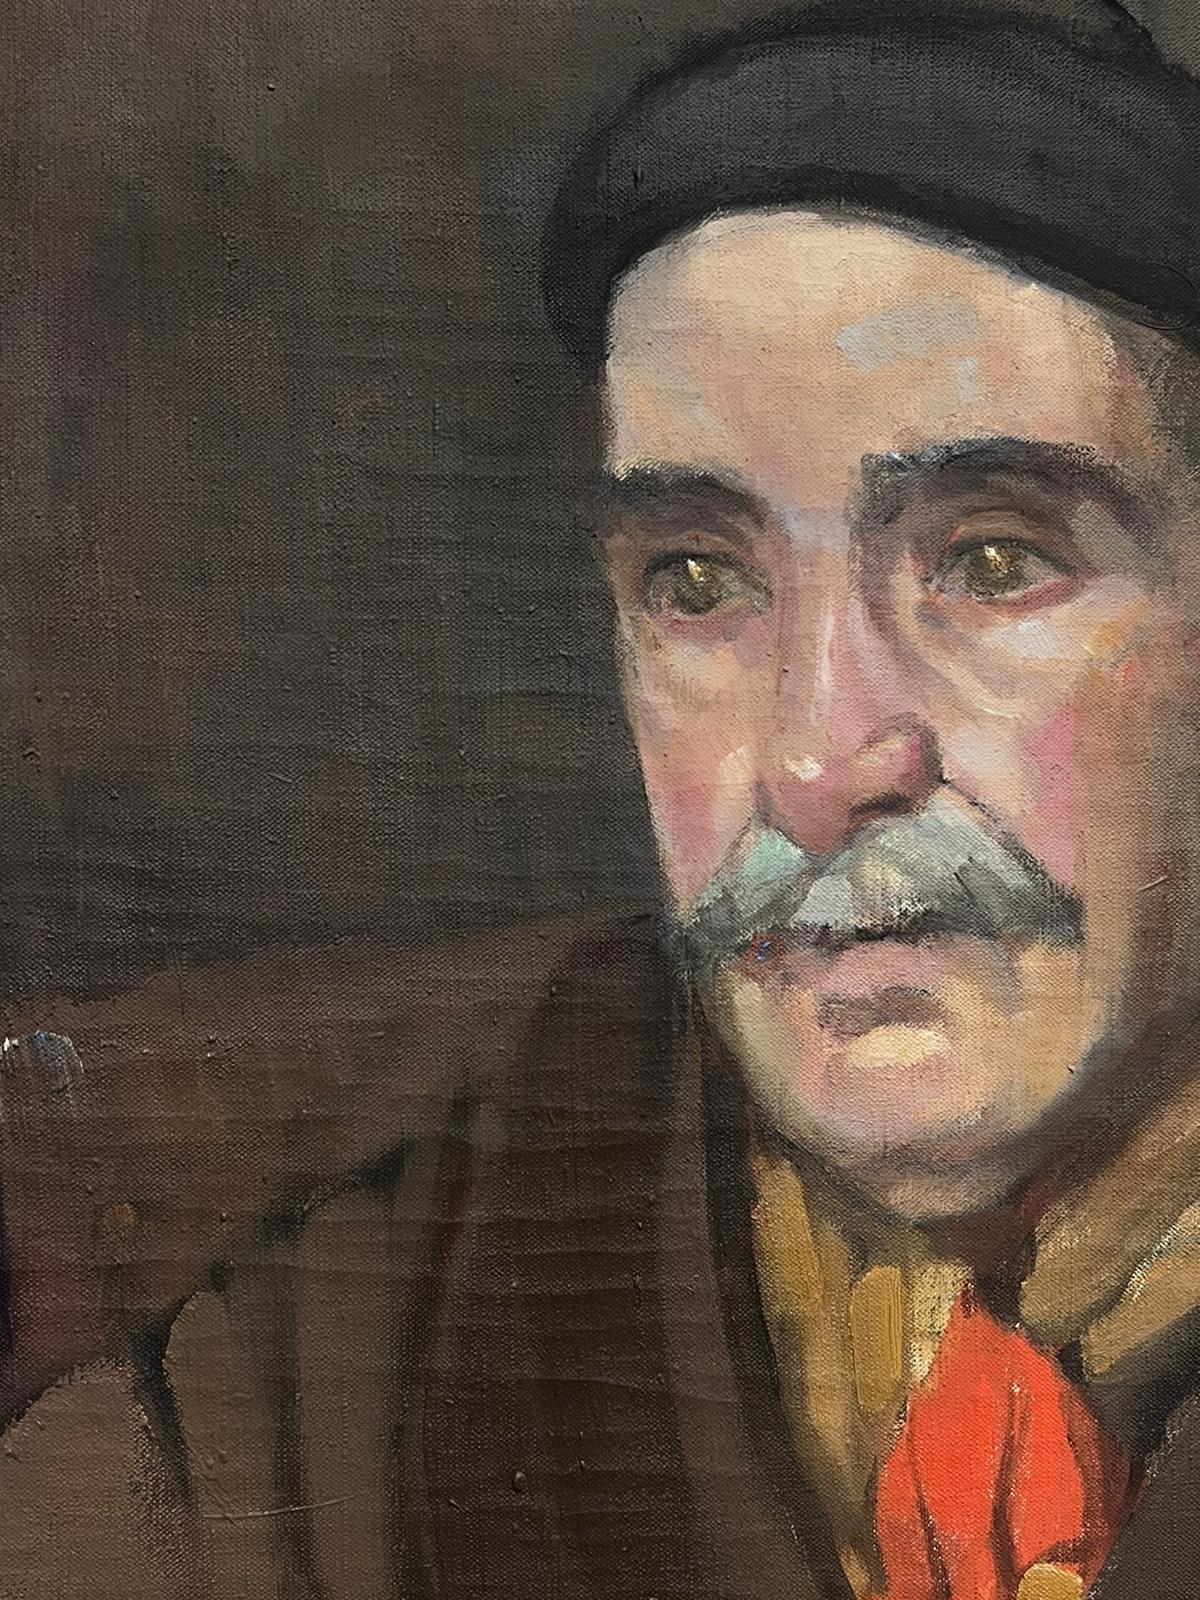 Portrait of a Man in Beret
by Louise Alix (French, 1888-1980) *see notes below
oil painting on canvas unframed
measures: 24 inches high by 20 inches wide
condition: overall very good and sound, a few scuffs and marks to the surface and wear to the